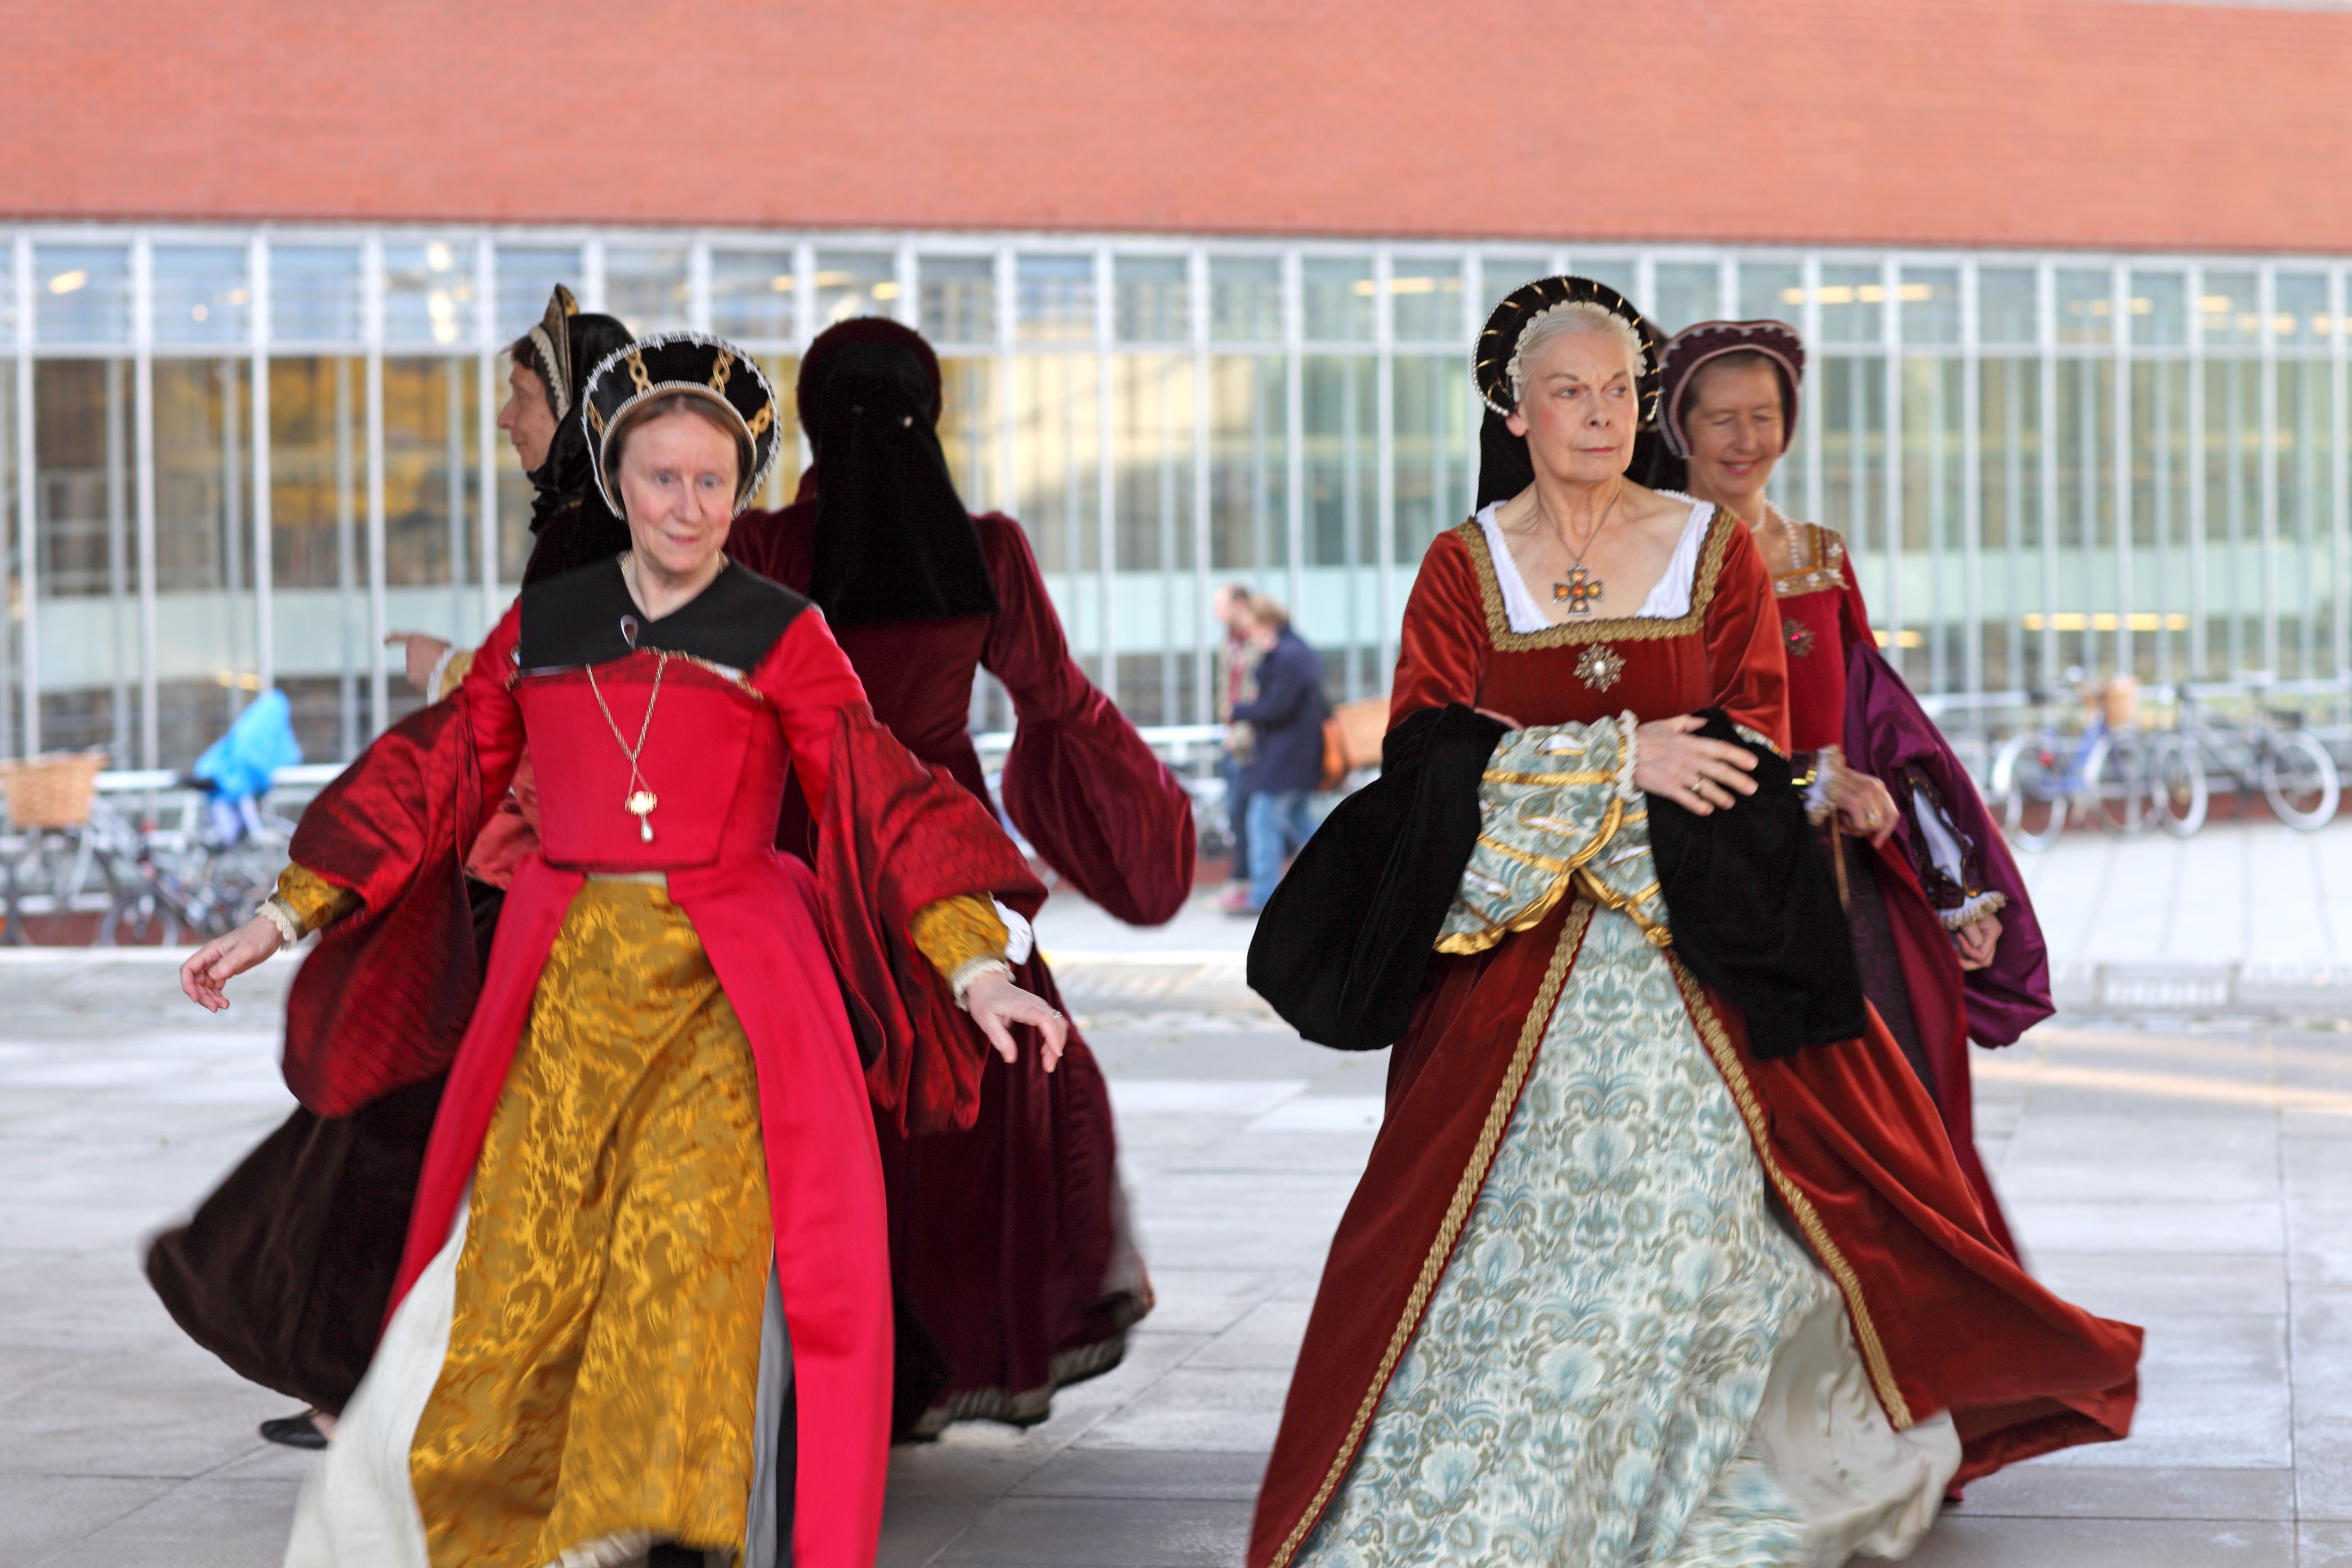 A demonstration of past legacies, with four actresses in Medieval clothing performing the roles of women in that time.